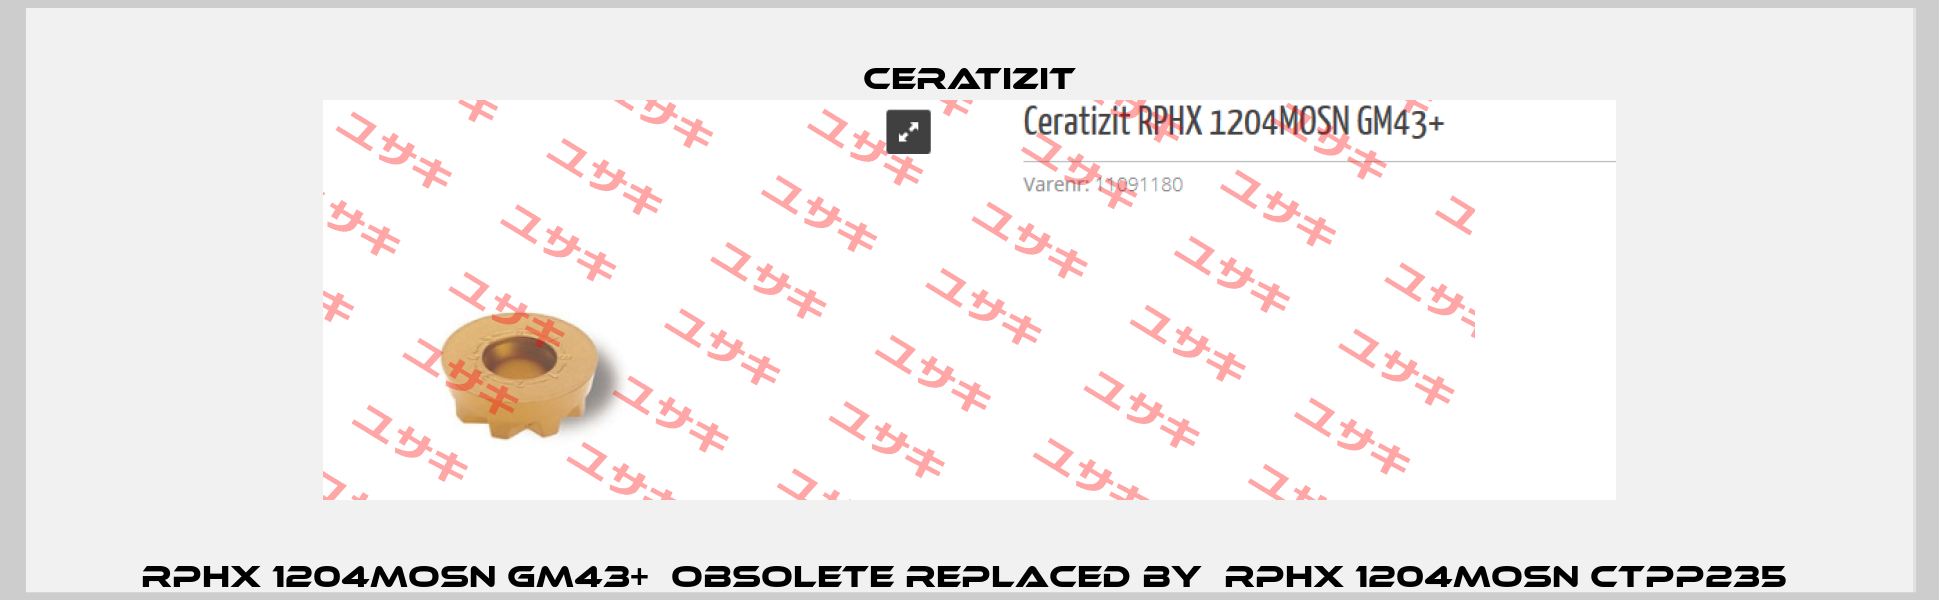 RPHX 1204MOSN GM43+  obsolete replaced by  RPHX 1204MOSN CTPP235  Ceratizit